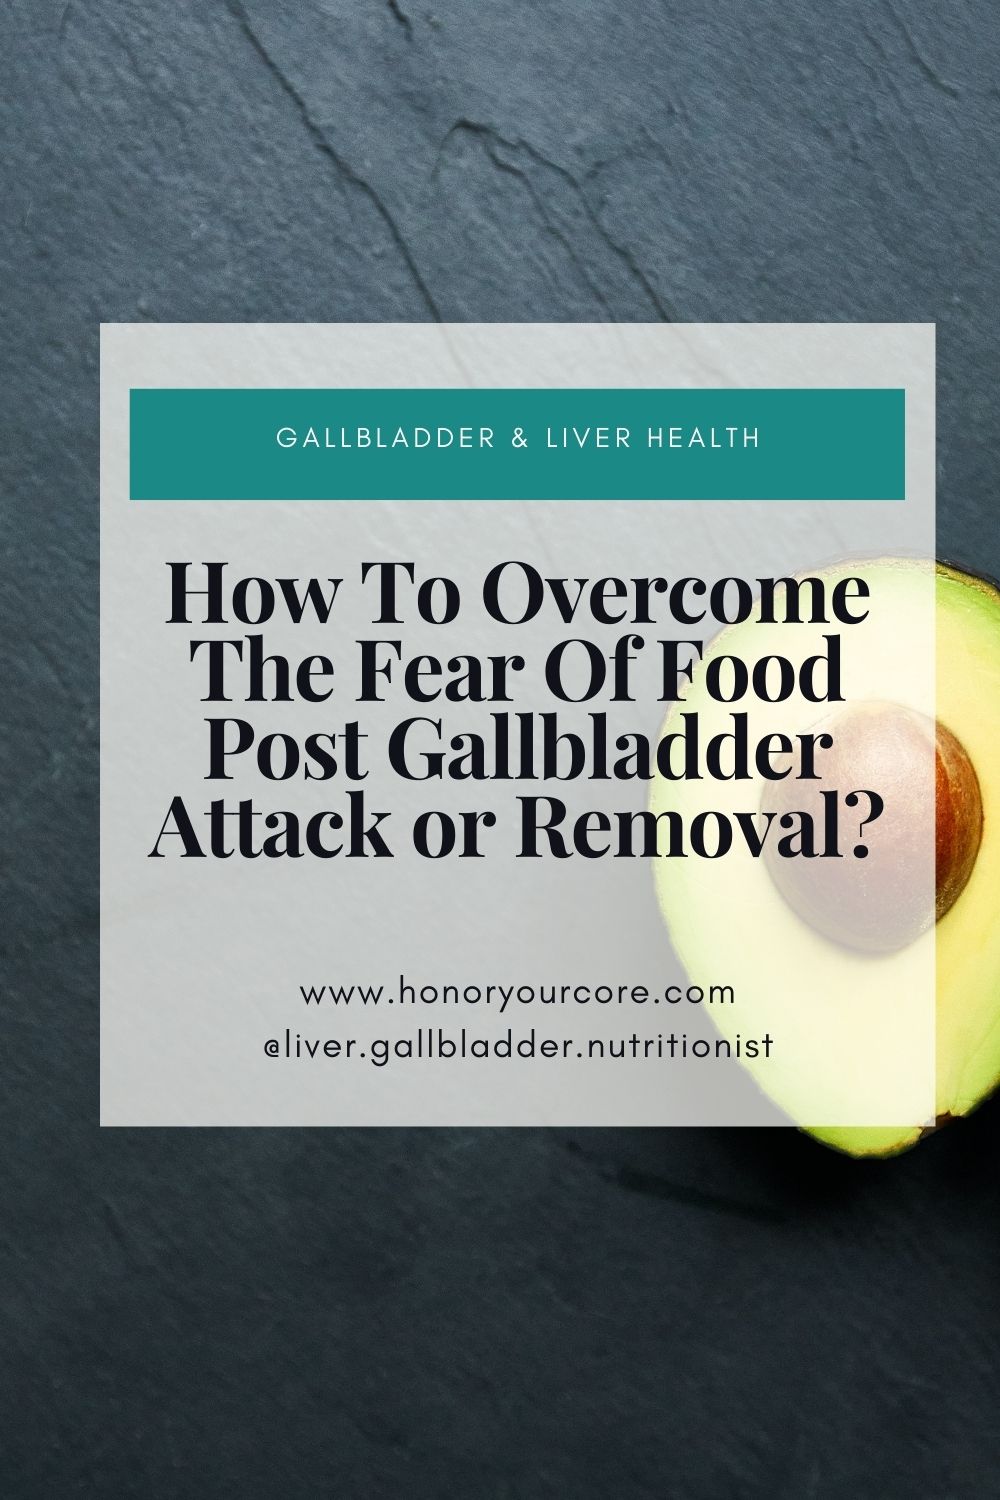 How To Overcome The Fear Of Food Post Gallbladder Attack or Removal?